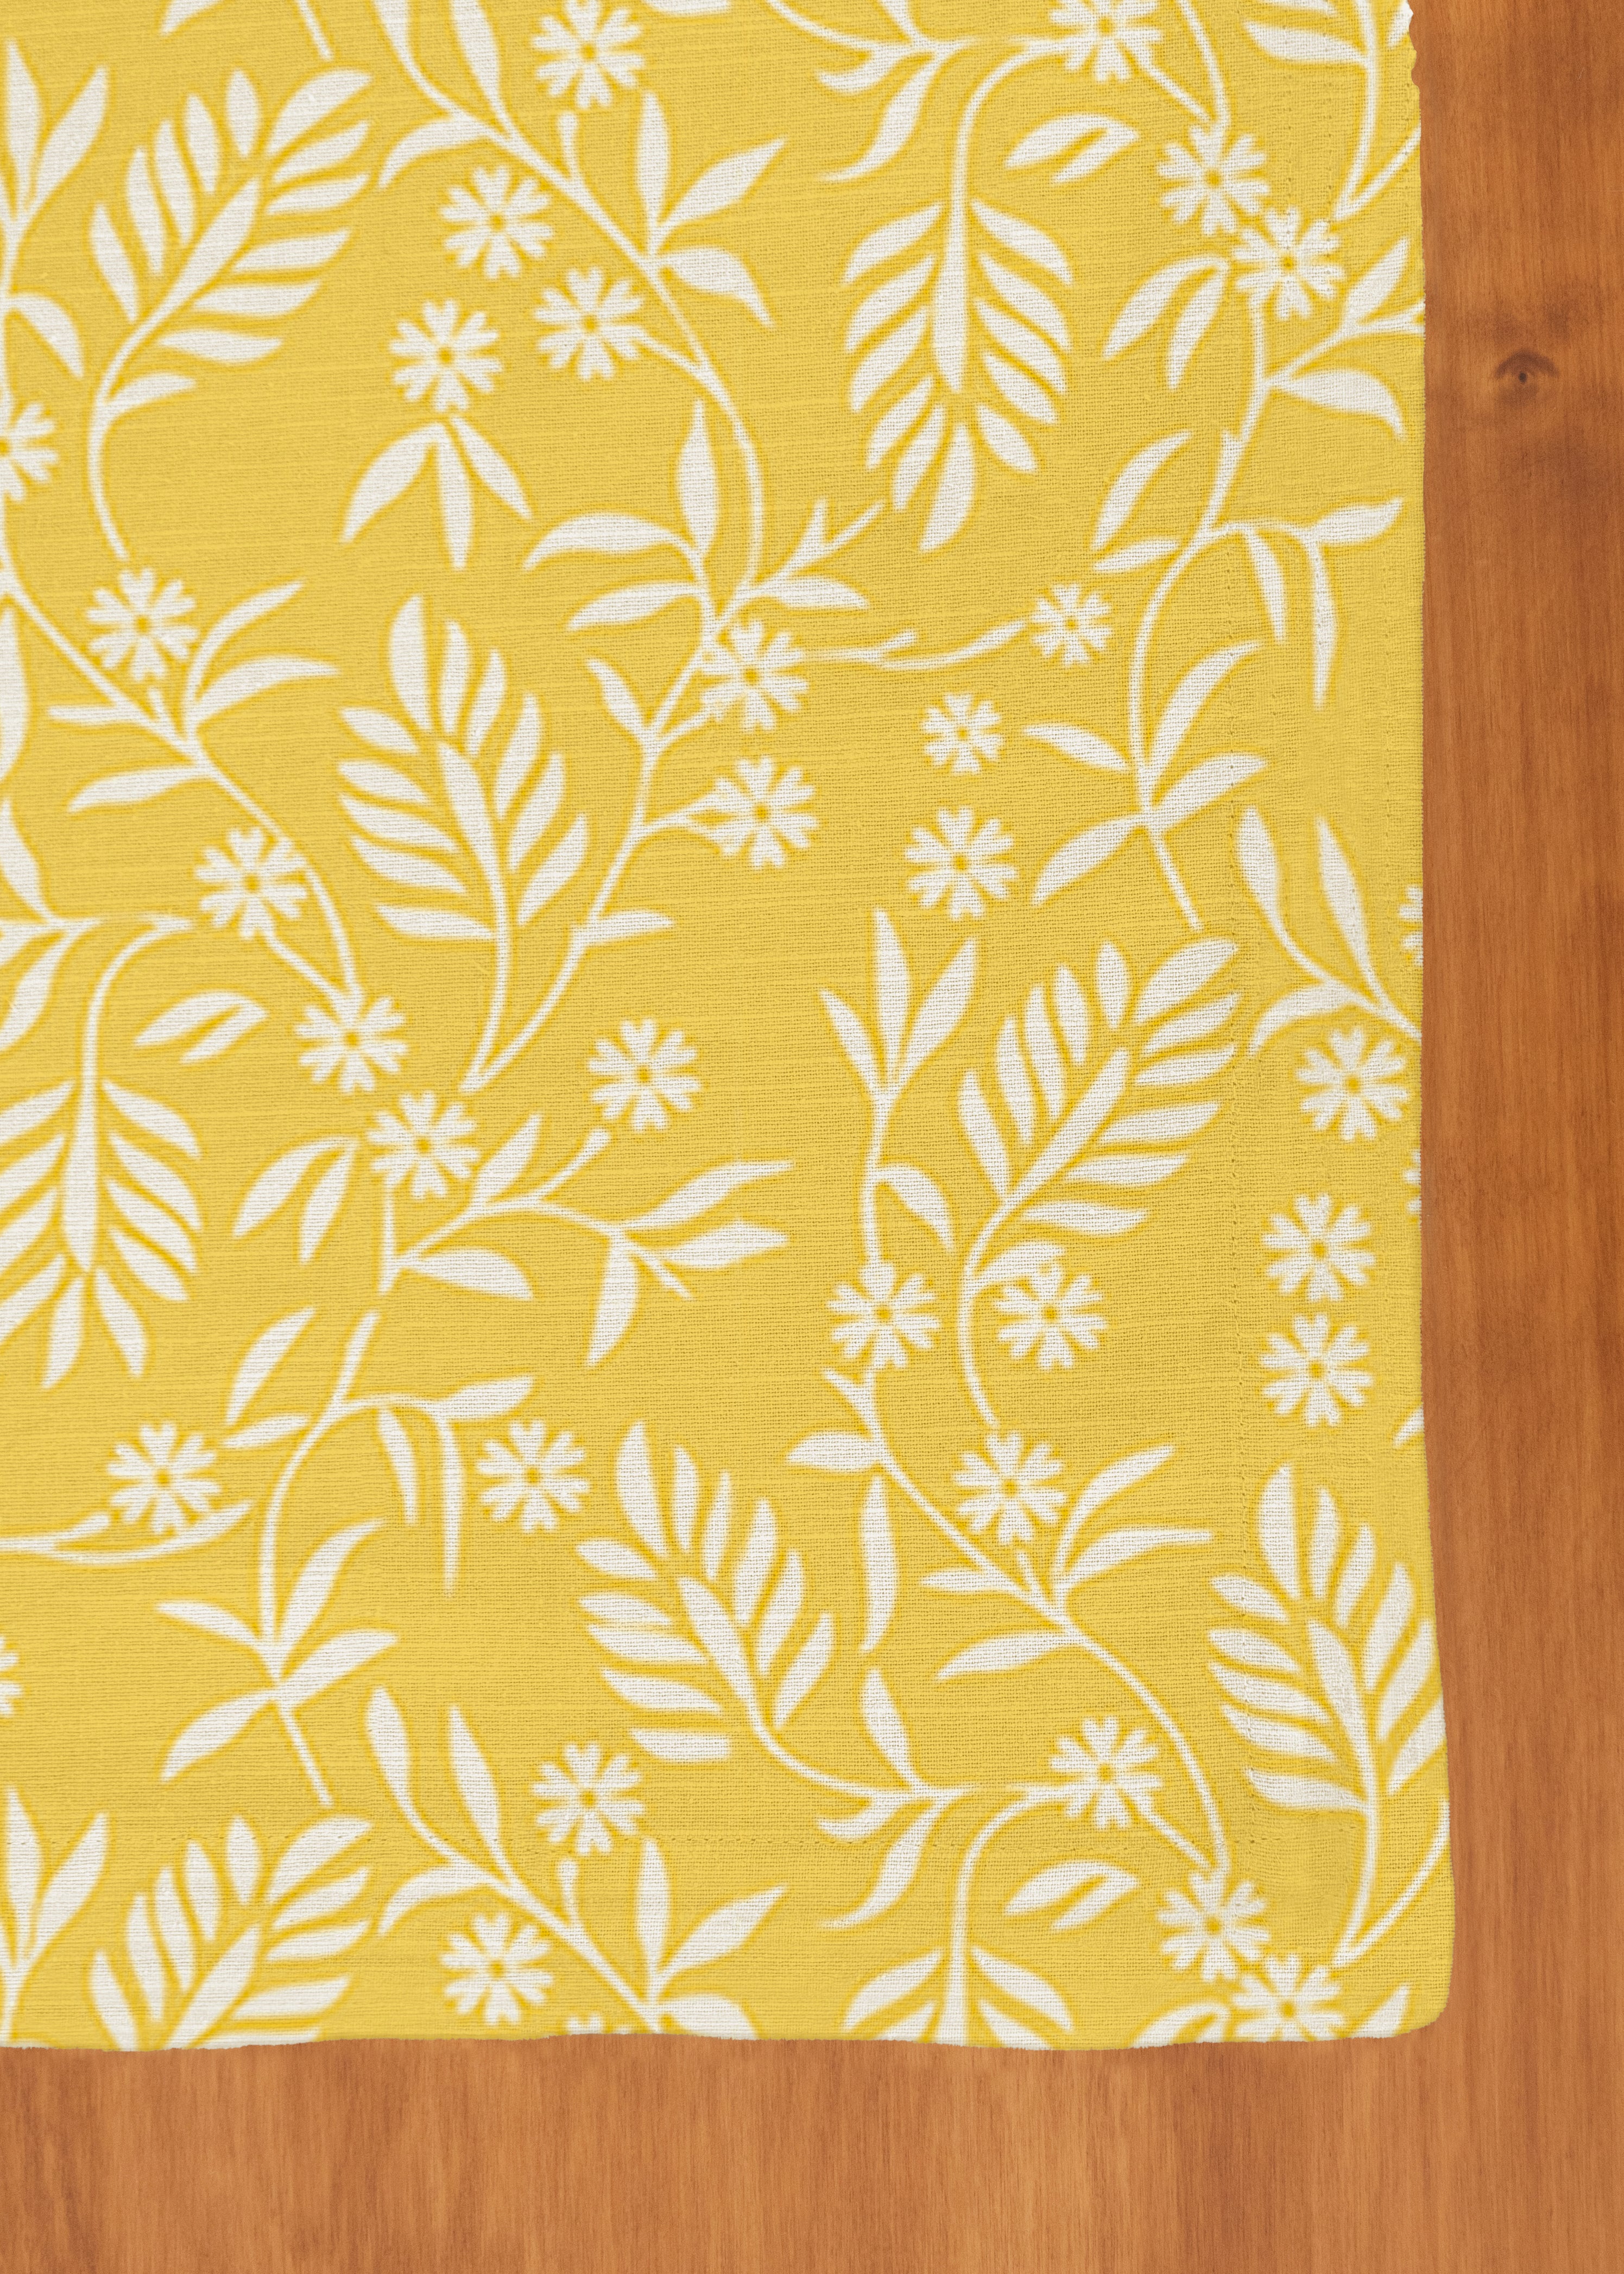 Daisy Printed Cotton Table Cloth - Yellow